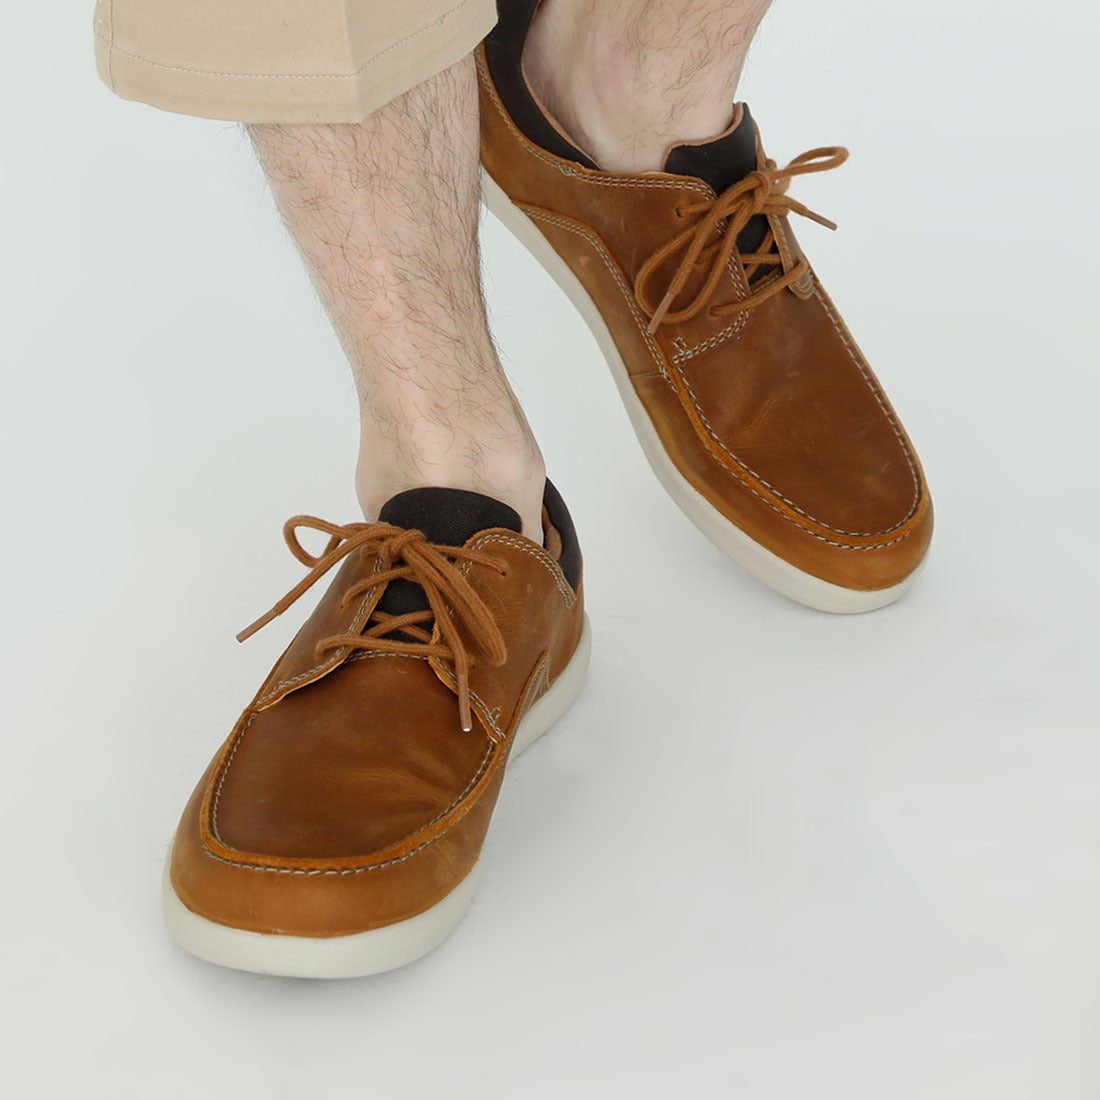 clarks un lisbon Cheaper Than Retail Price\u003e Buy Clothing, Accessories and  lifestyle products for women \u0026 men -